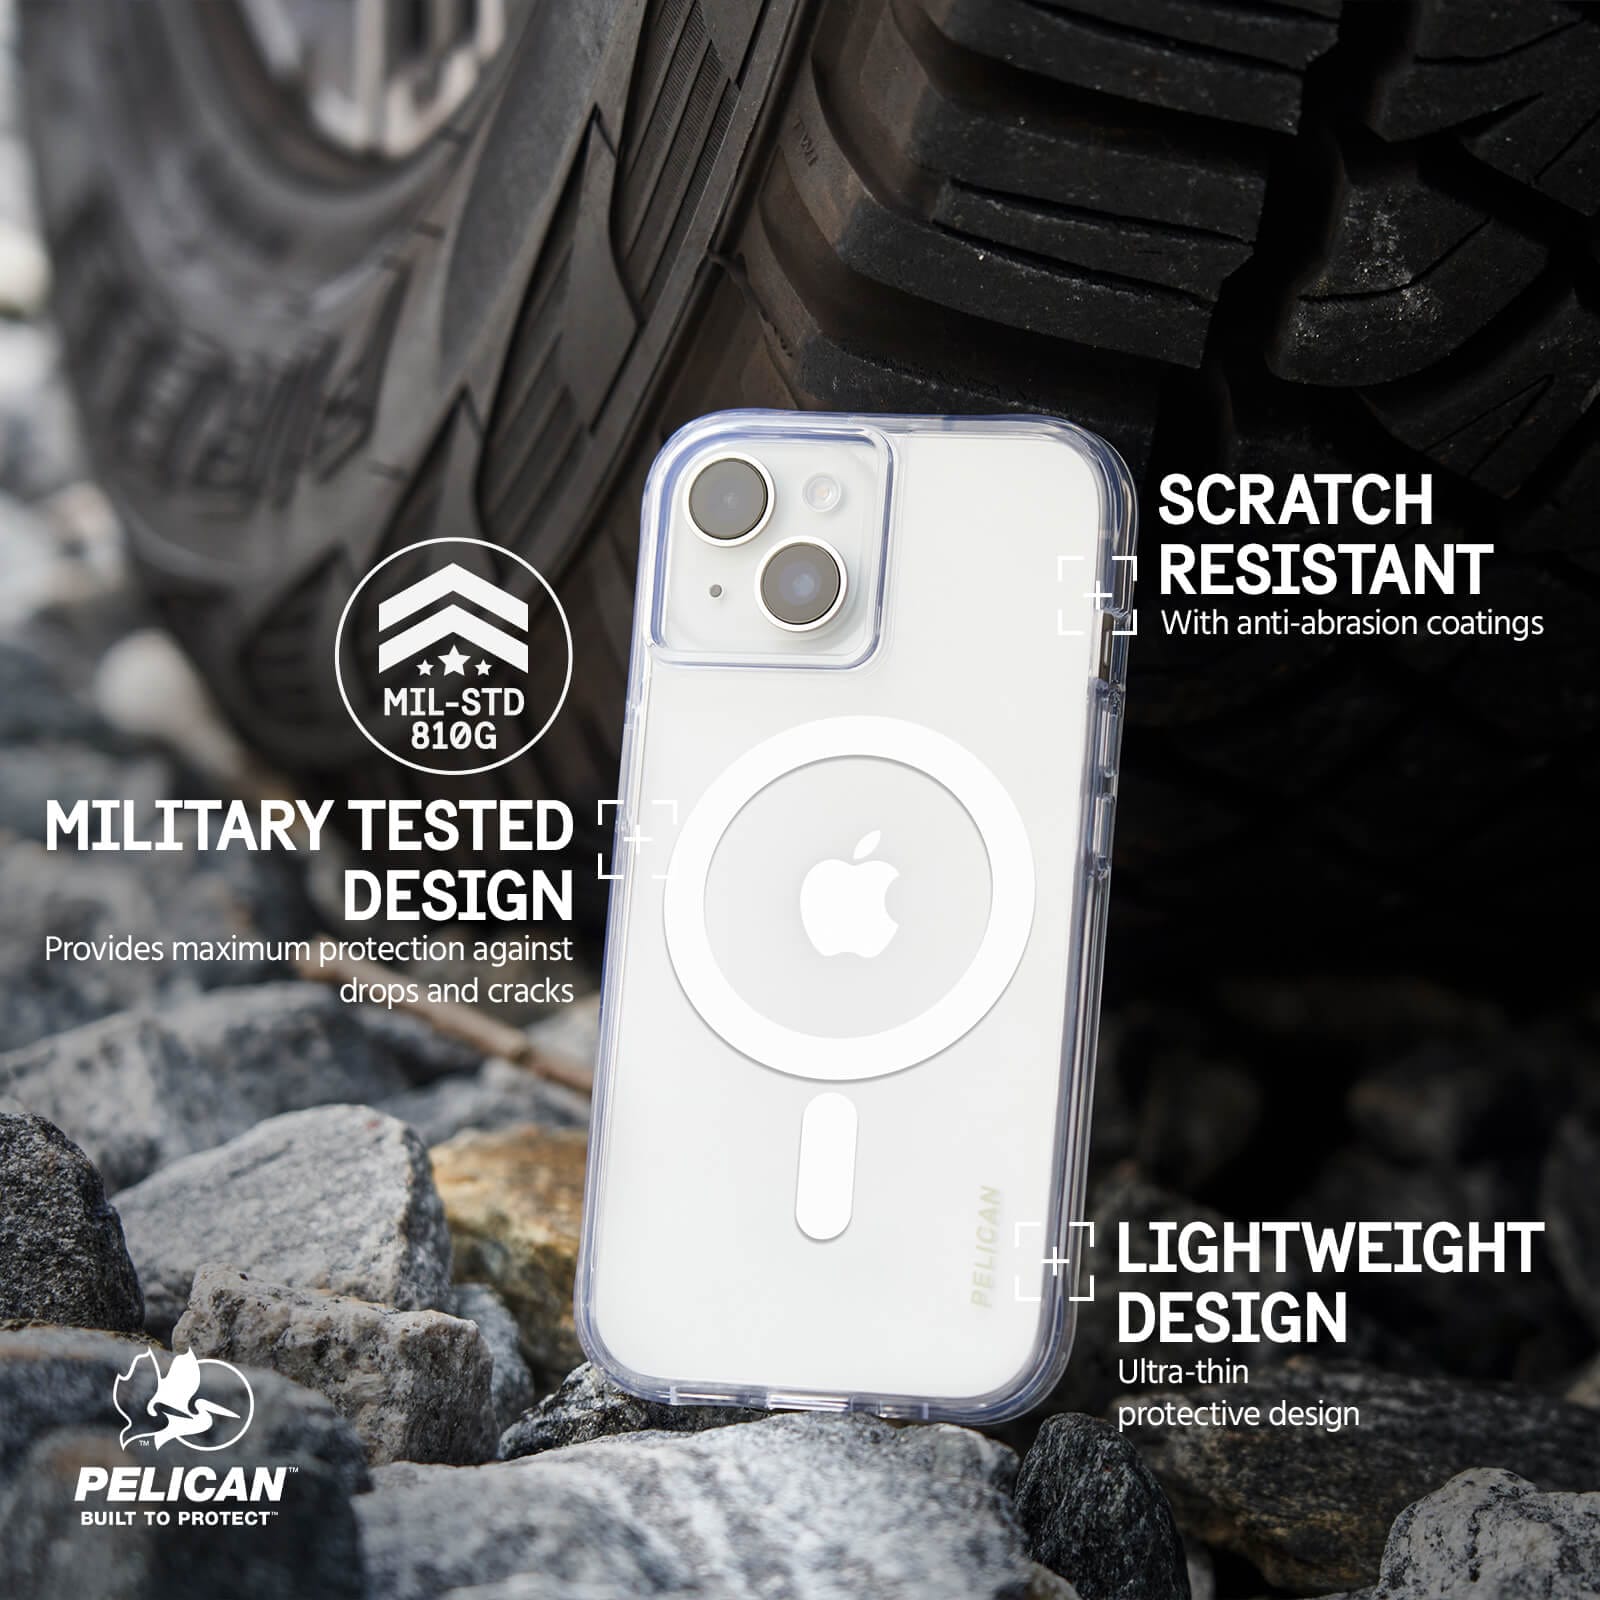 MILITARY TESTED DESIGN. PROVIDES MAXIMUM PROTECTION AGAINST DROPS AND CRACKS. SCRATCH RESISTANT WITH ANTI-ABRASION COATINGS.